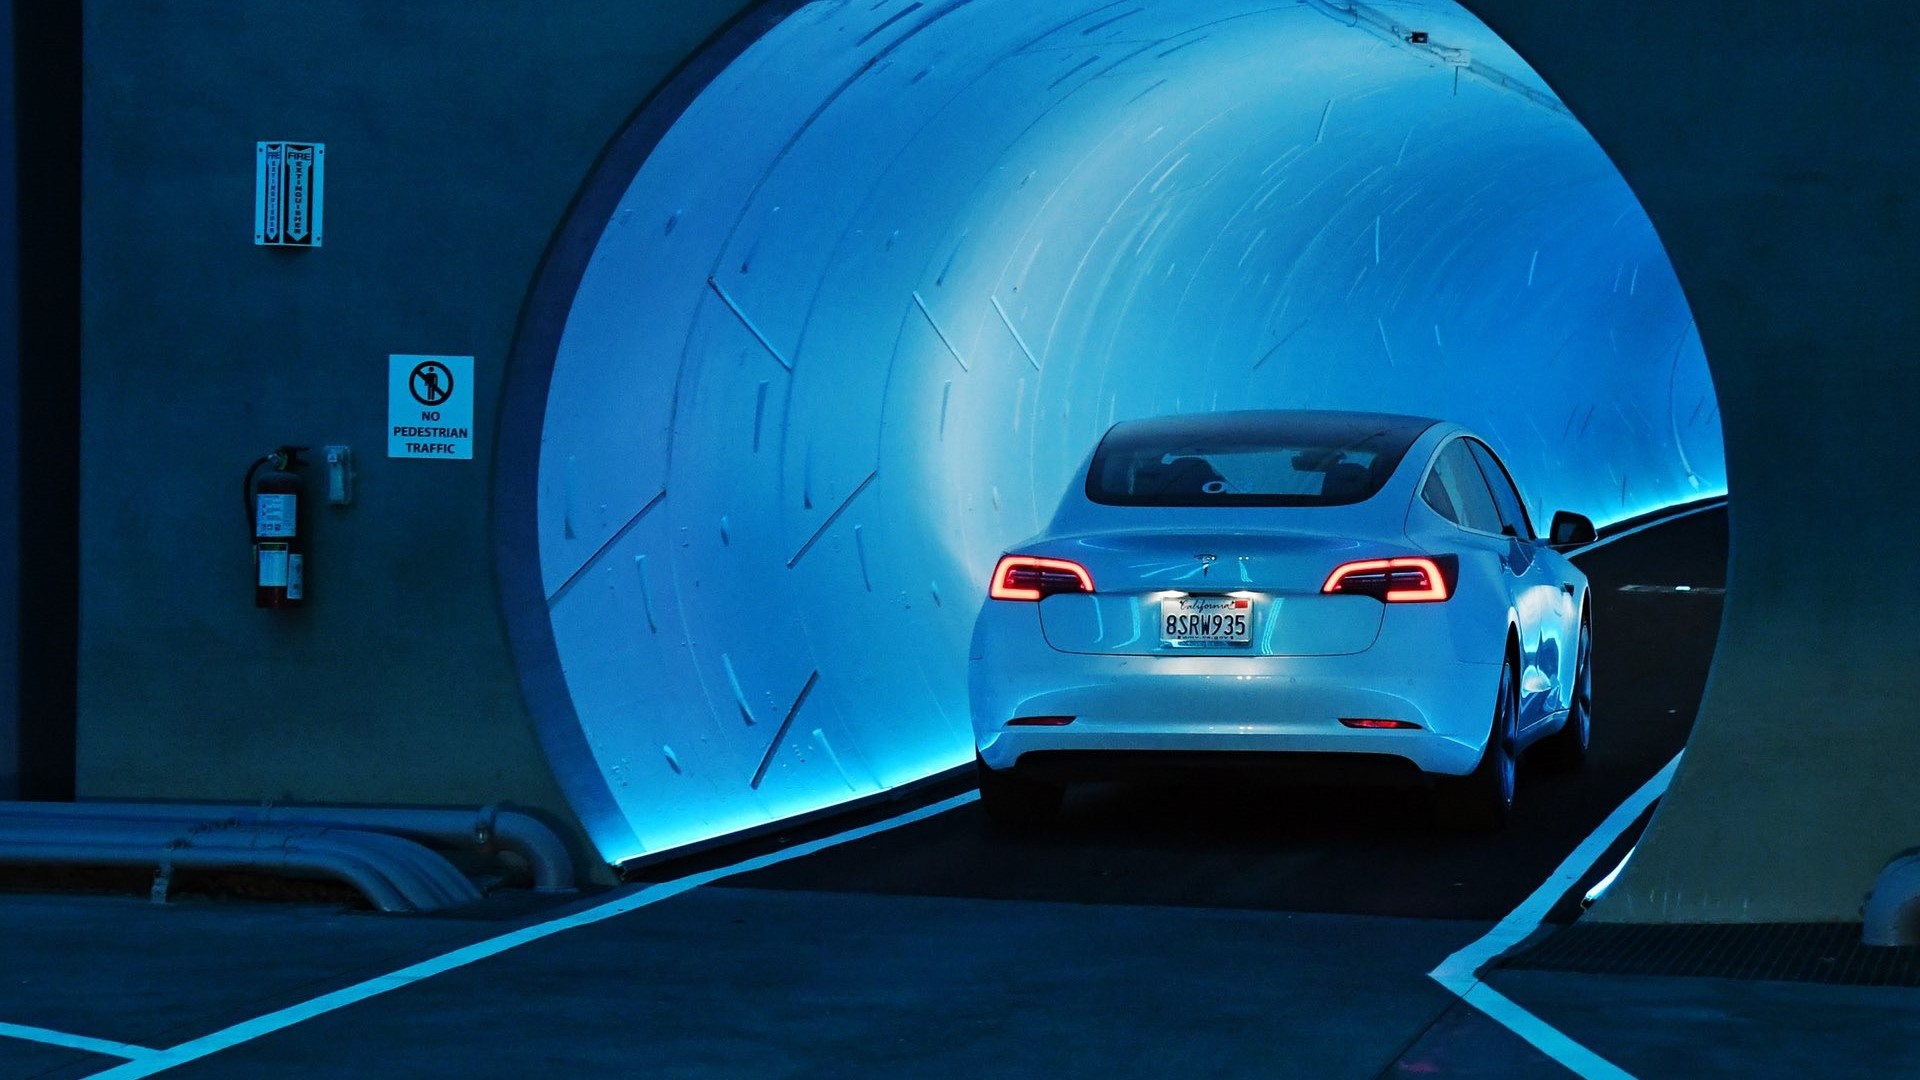 The idea would be an underground tunnel system to get drivers to places more efficiently.